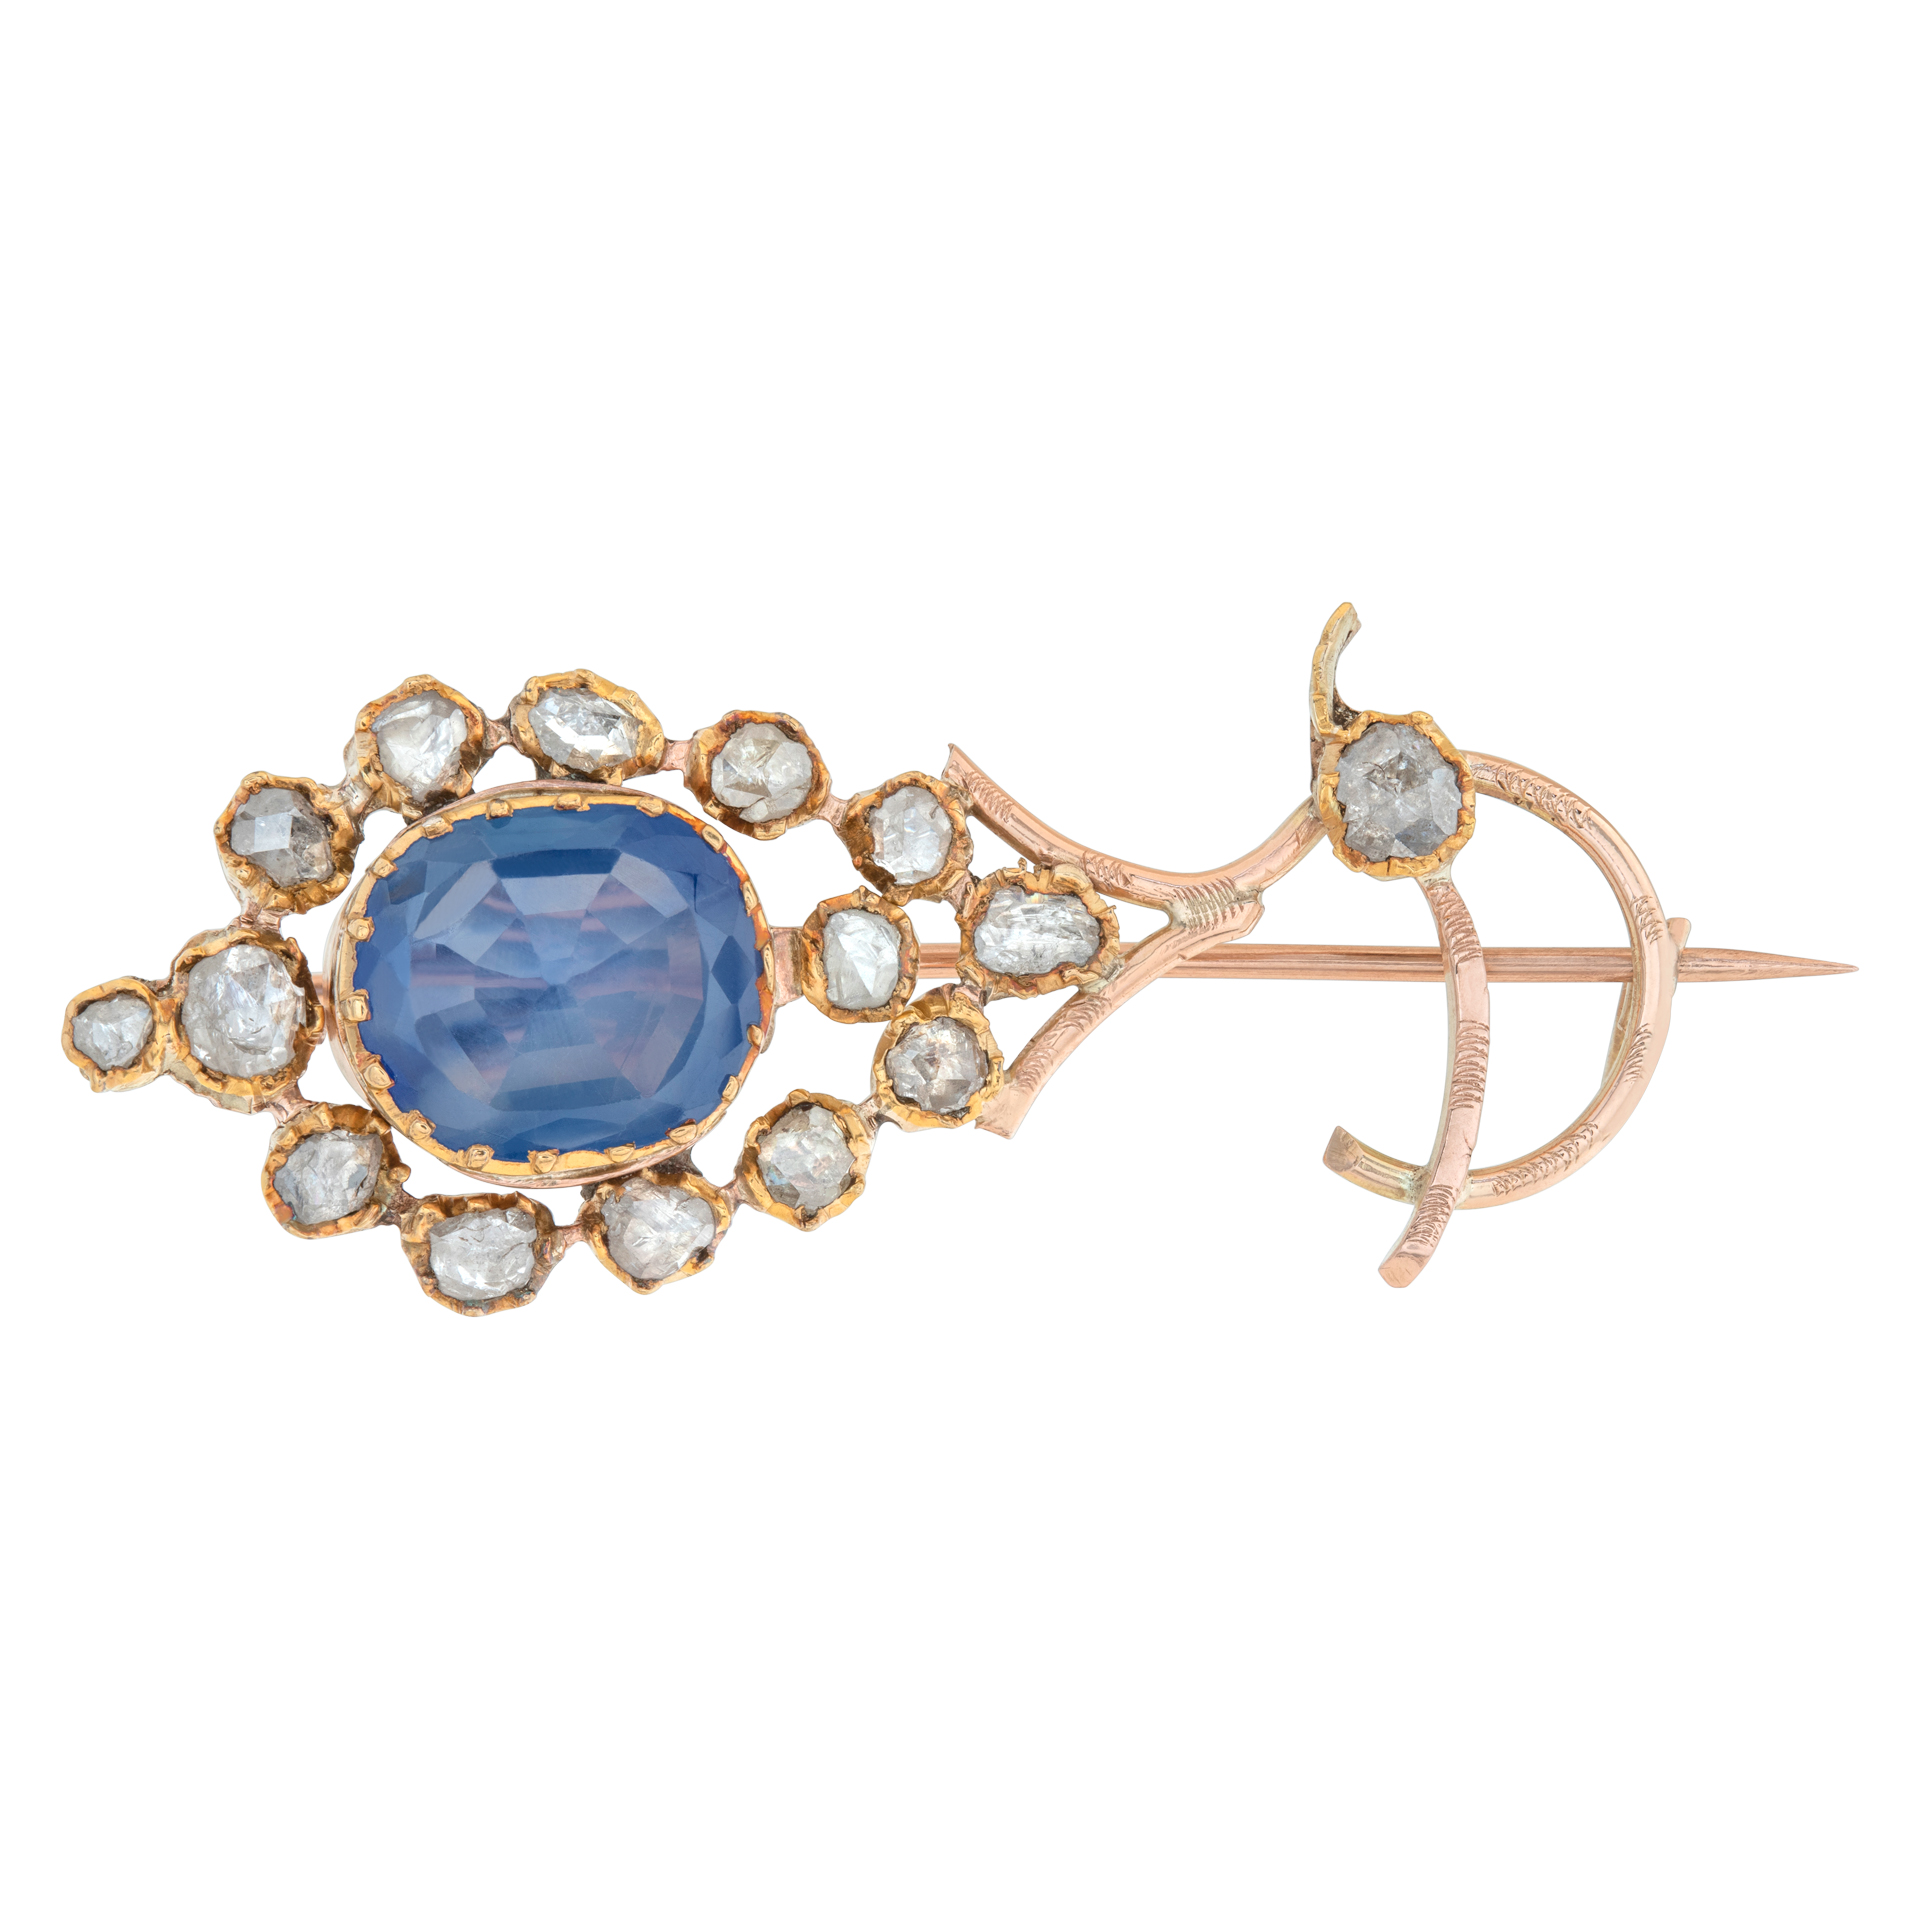 Antique European brooch, circa 1800's. with old mine cut diamonds and unheated natural sapphire center, set in 18k yellow gold. image 1